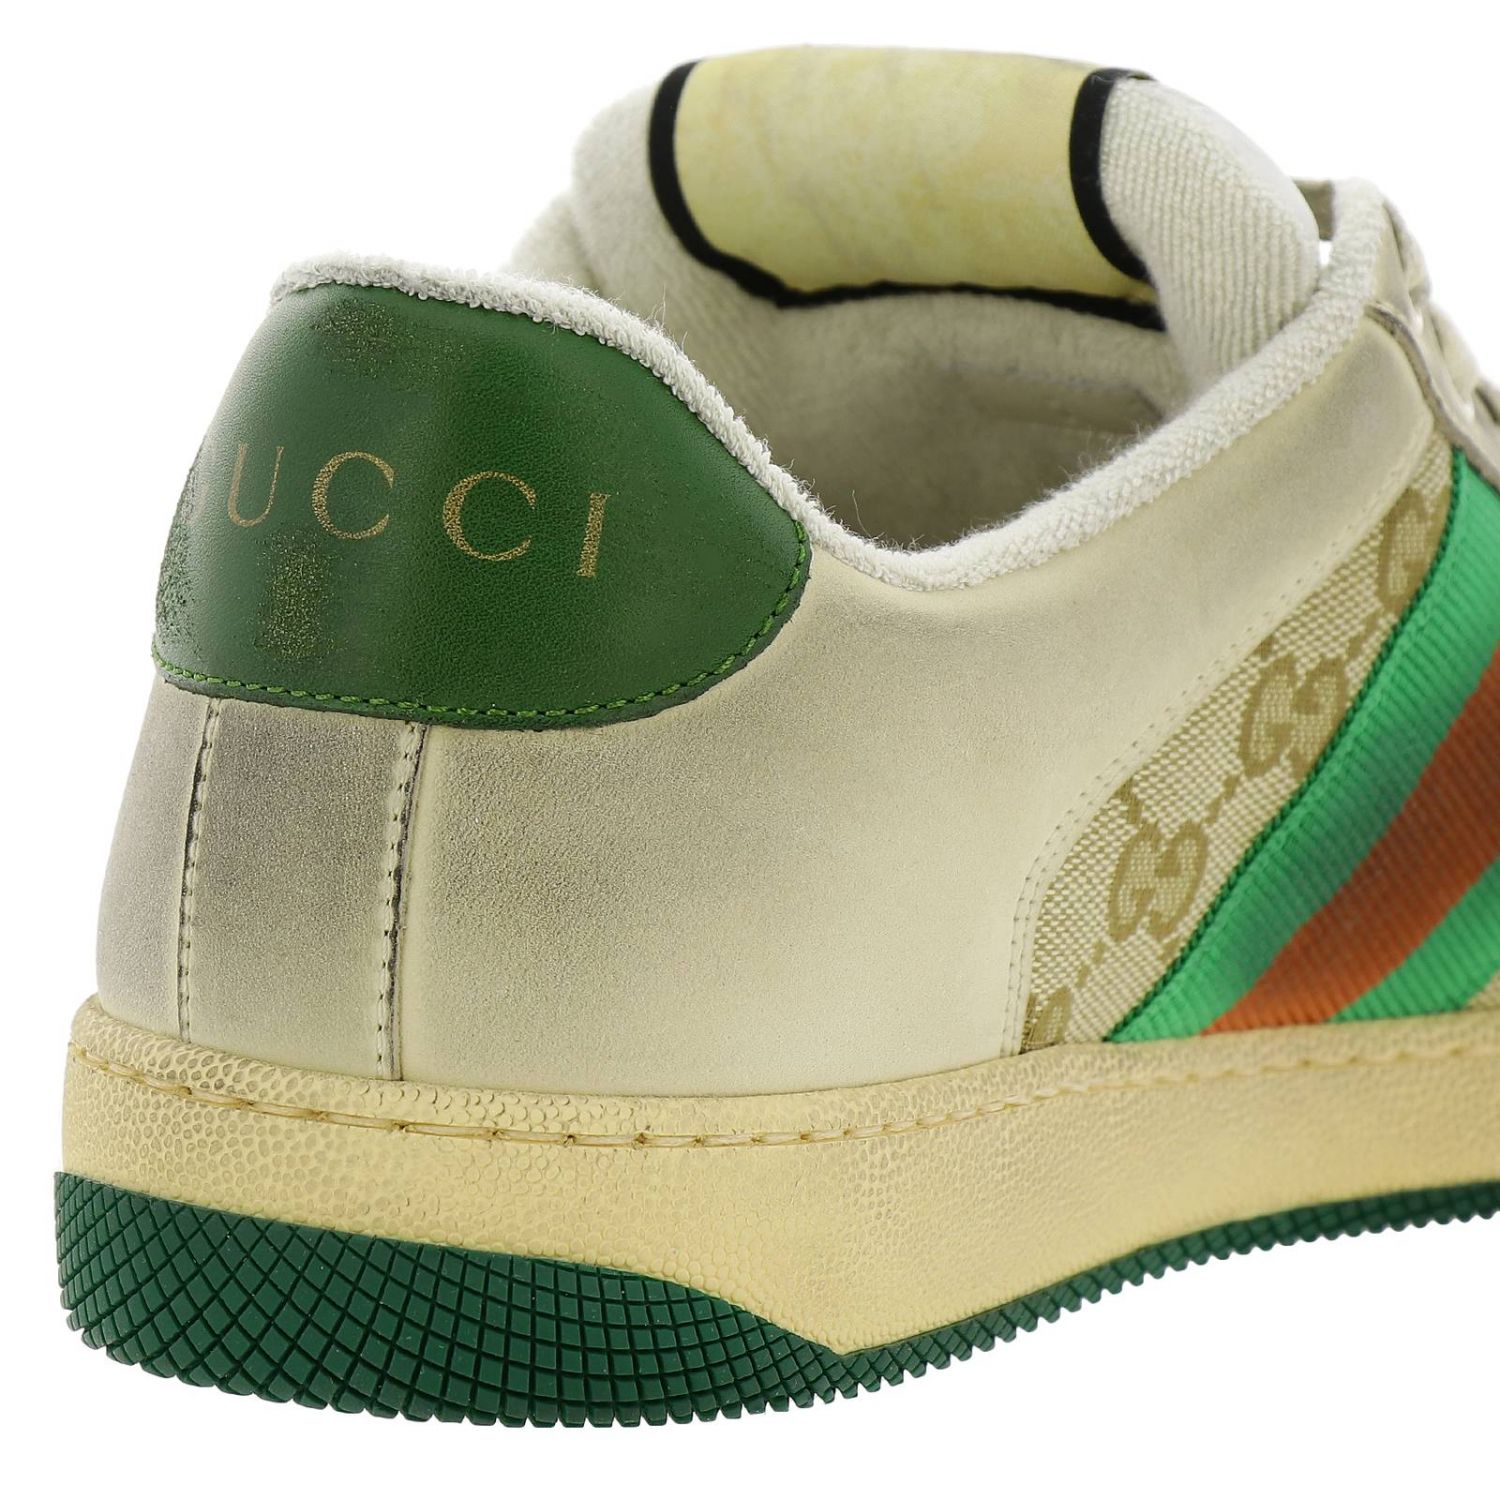 GUCCI: Screener sneakers in vintage leather with Web straps and GG